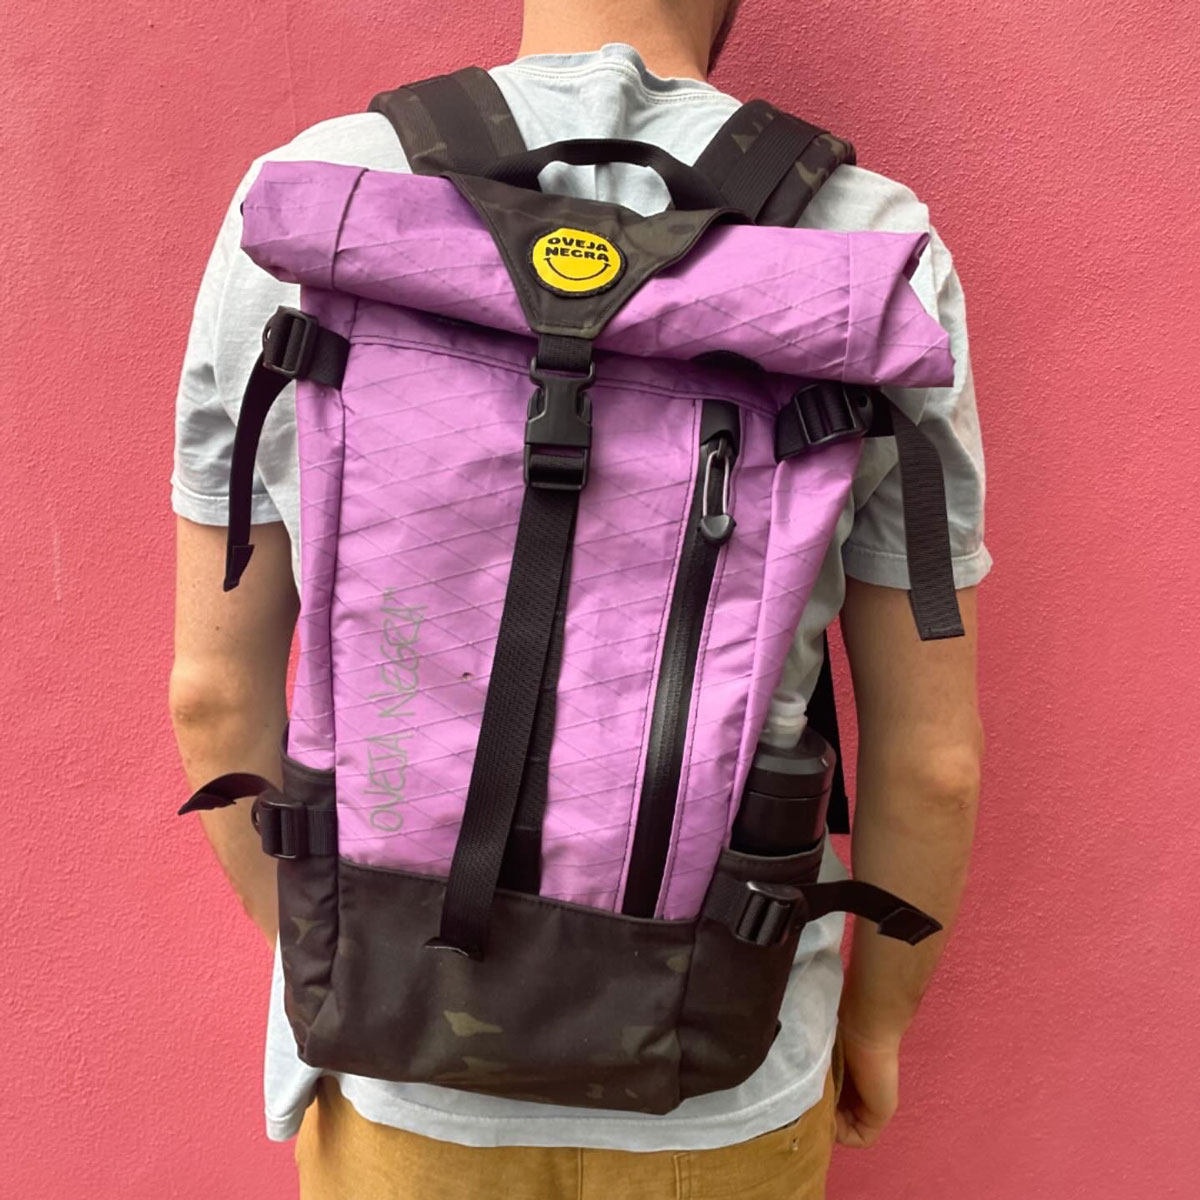 A person wearing the Oveja Negra Portero Backpack while hiking through a lush forest, highlighting the backpack's eco-friendly design and sustainable materials.